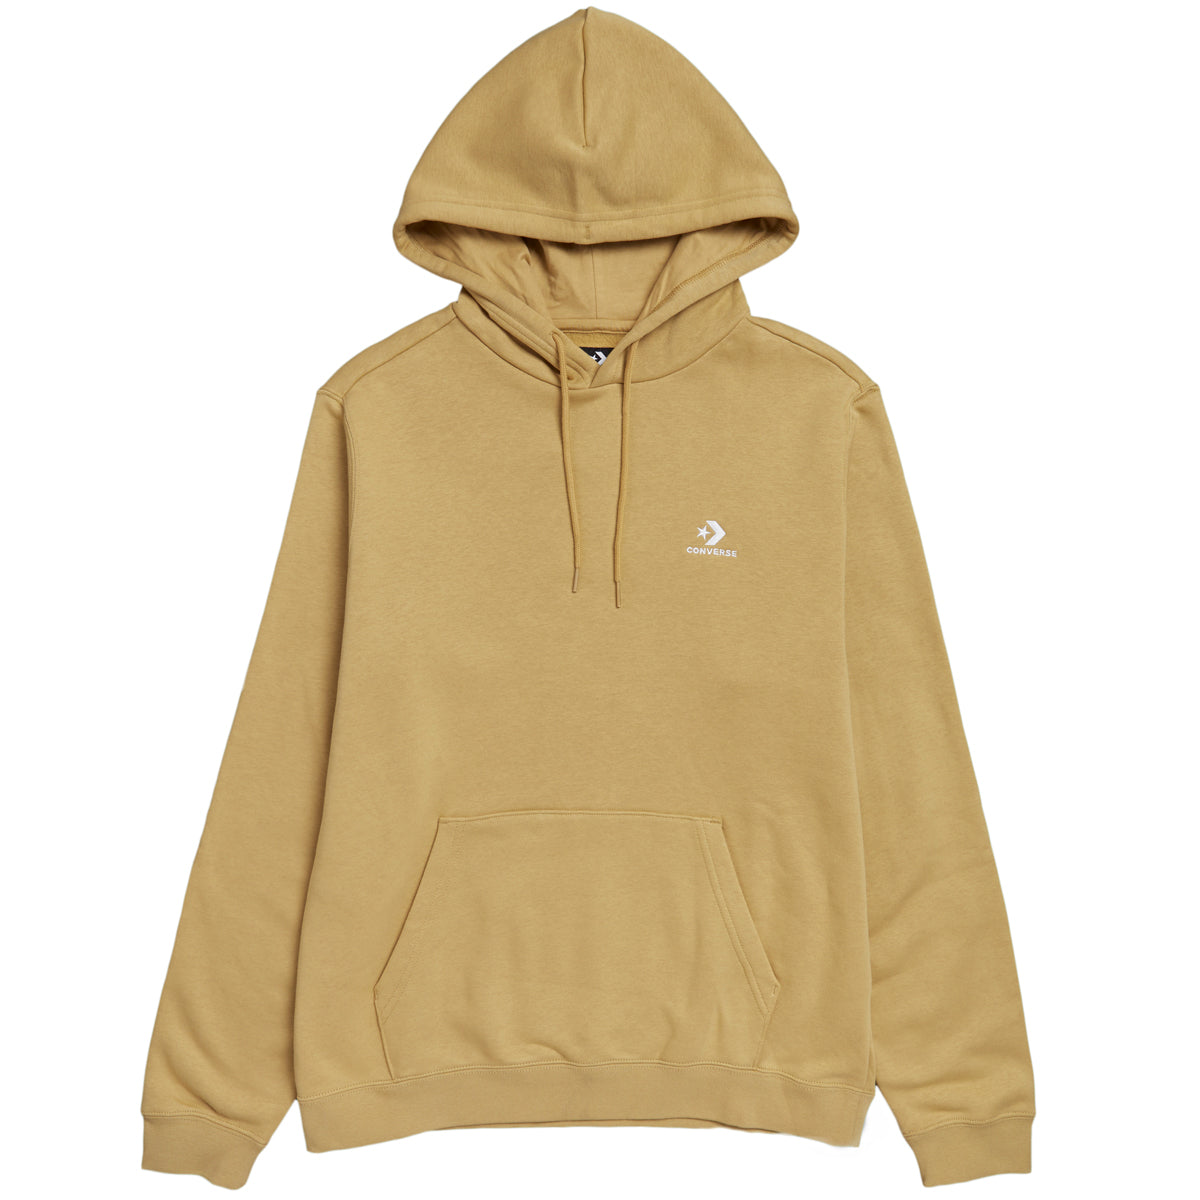 Converse Go-to Embroidered Star Chevron Hoodie - Dunescape image 1